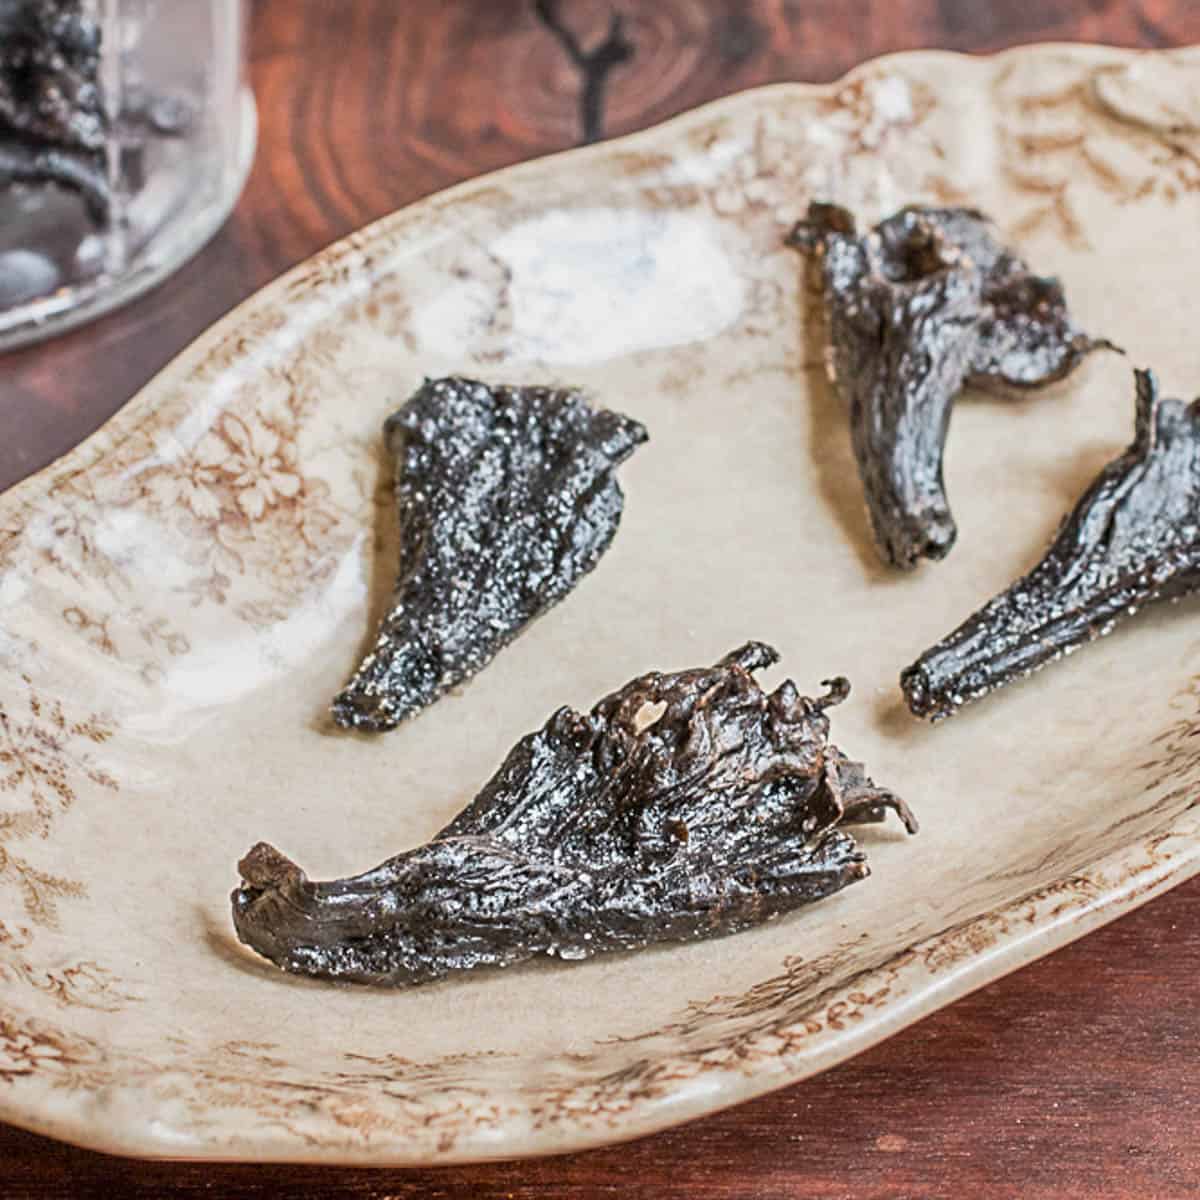 candied black trumpet mushrooms on a dish 